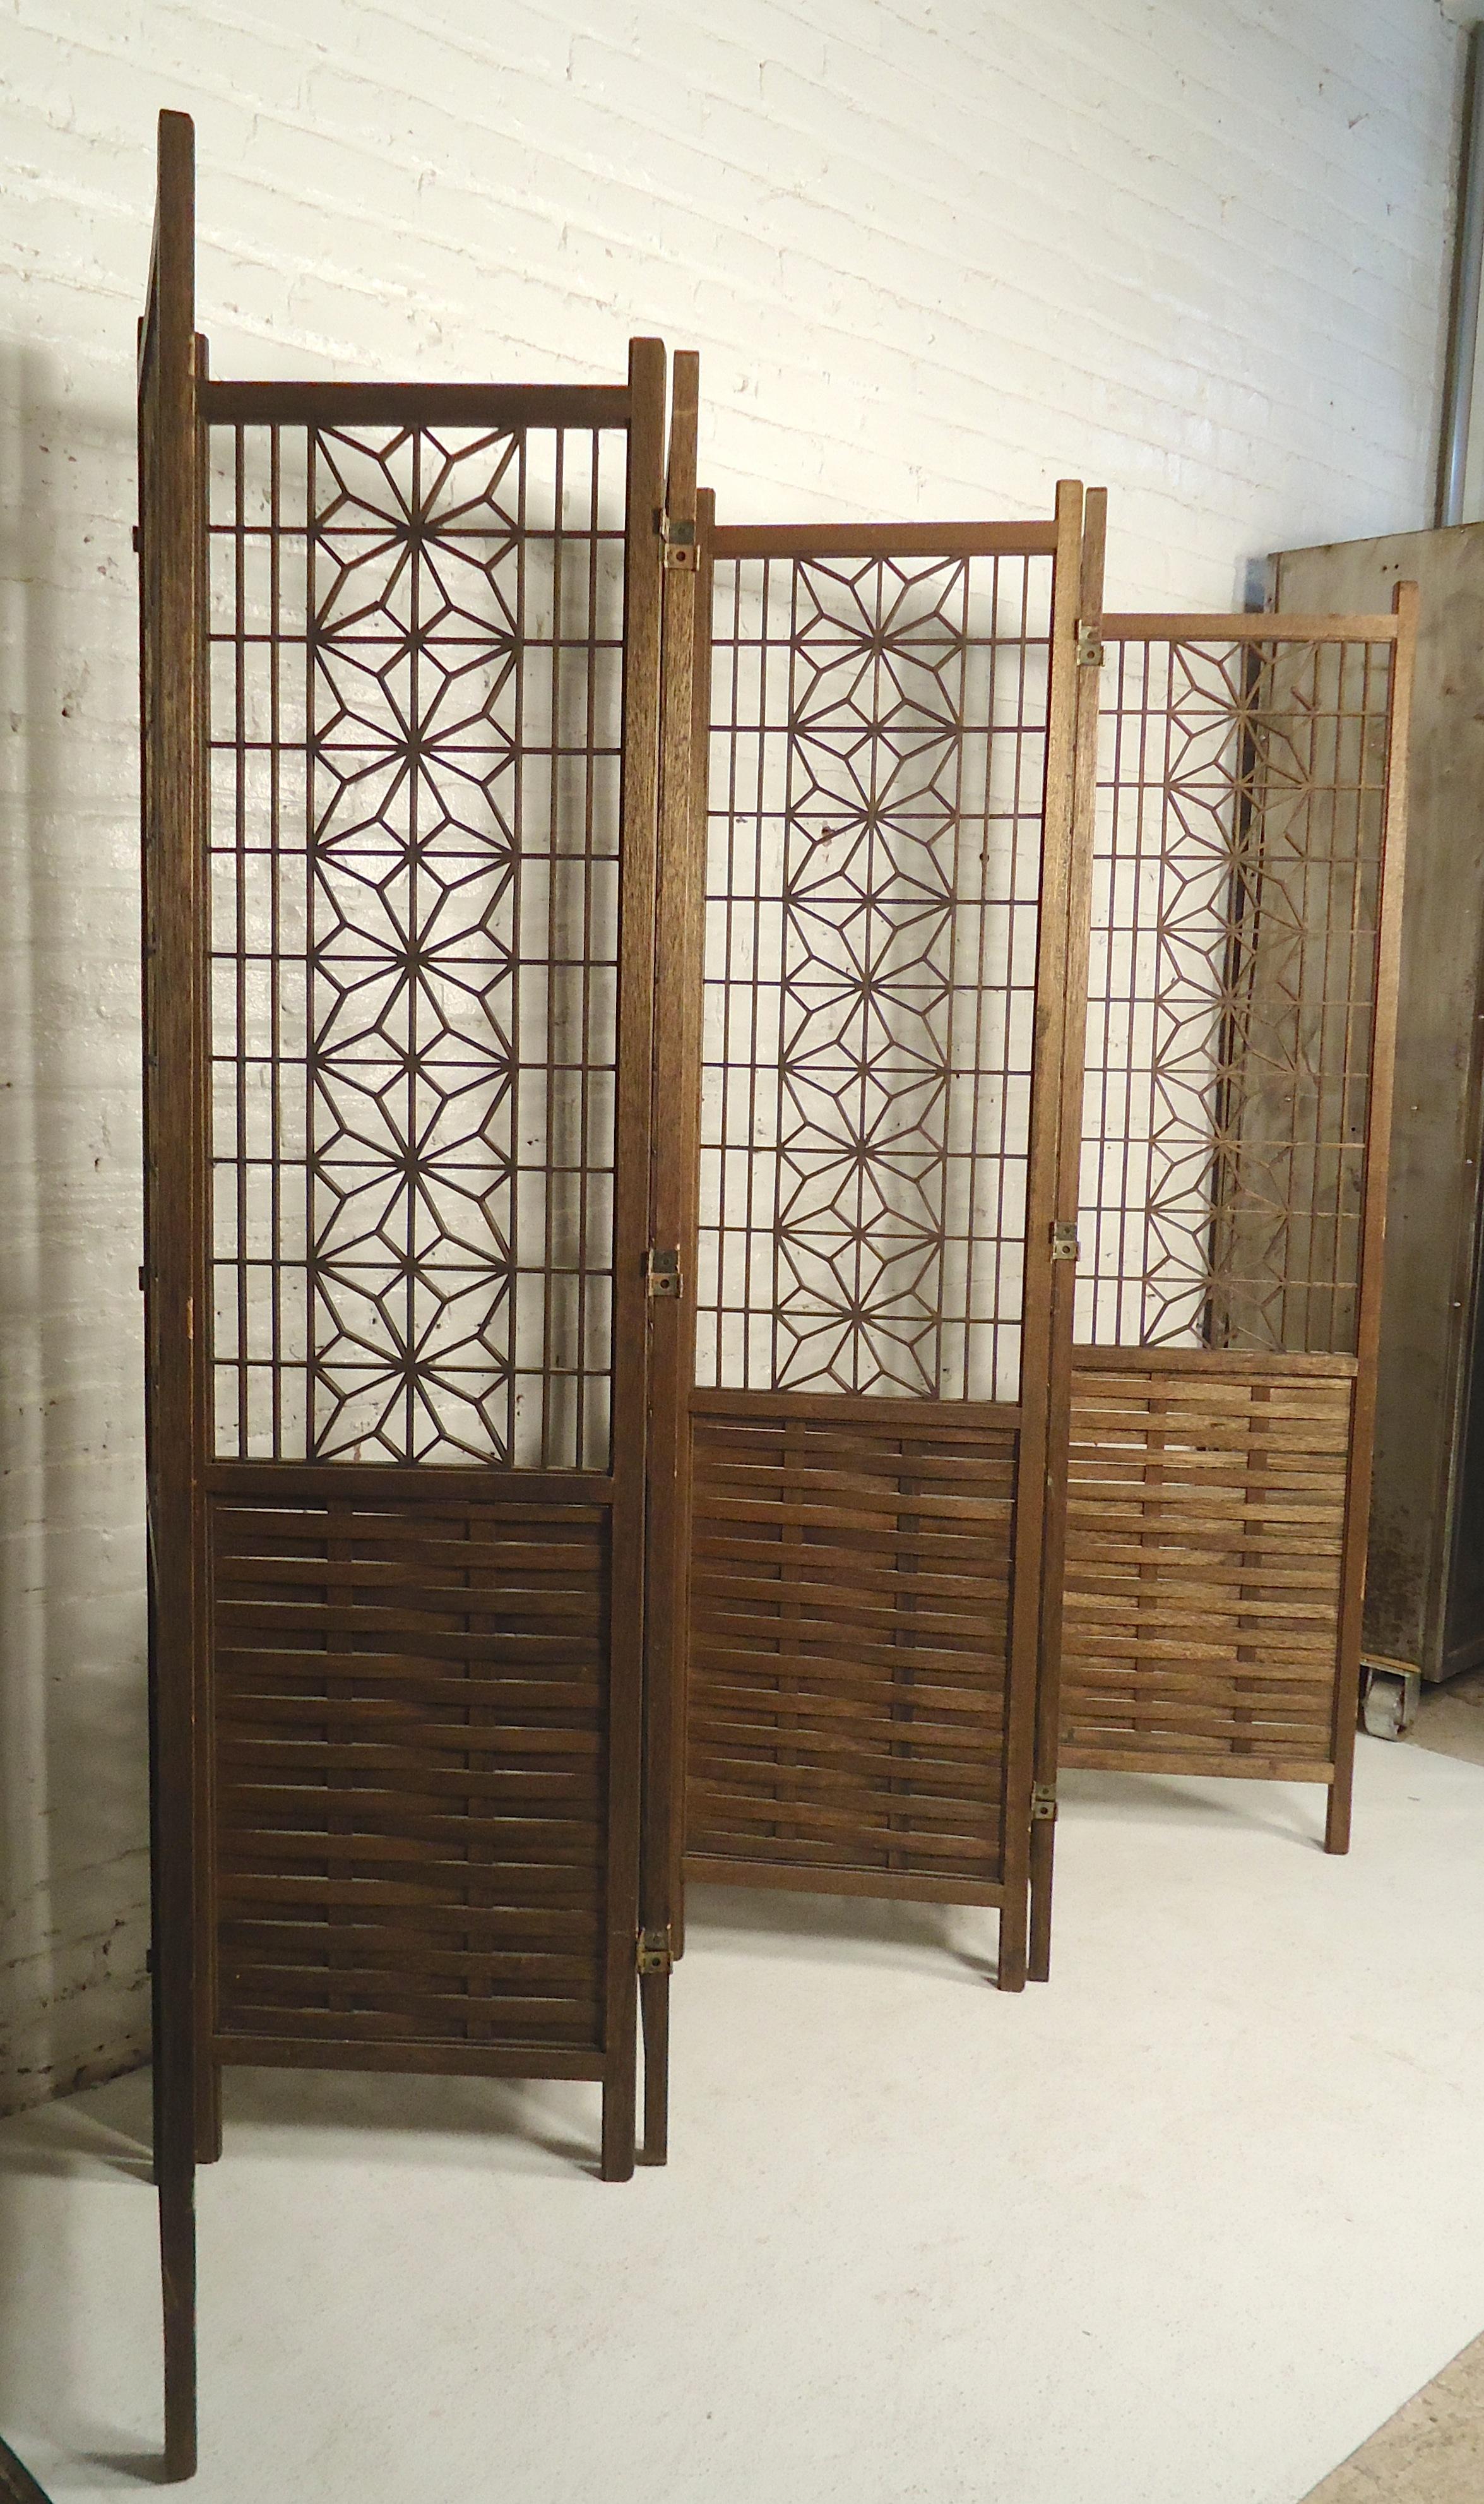 Beautiful teak wood room divider with woven bottom and geometric pattern top portion. 
Each panel is 18